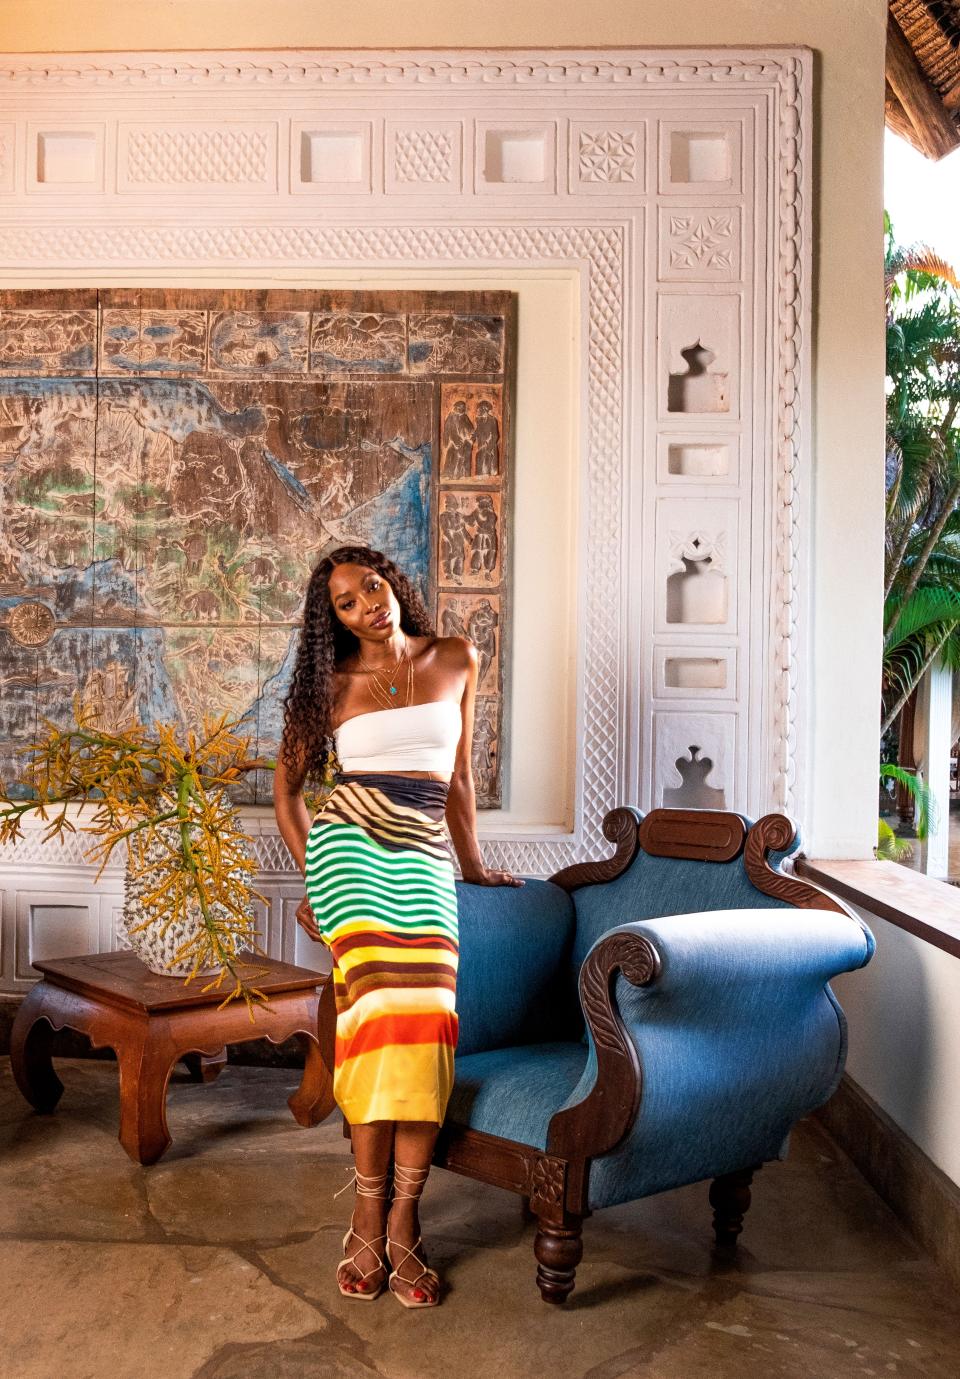 Naomi Campbell, wearing a Jade Swim bandeau top, Dries van Noten skirt, and Cult Gaia sandals, in the entrance area of her Kenyan getaway. On wall, a Bas-relief of Africa by local artist Armando Tanzini. Fashion styling by Carlos Nazario.